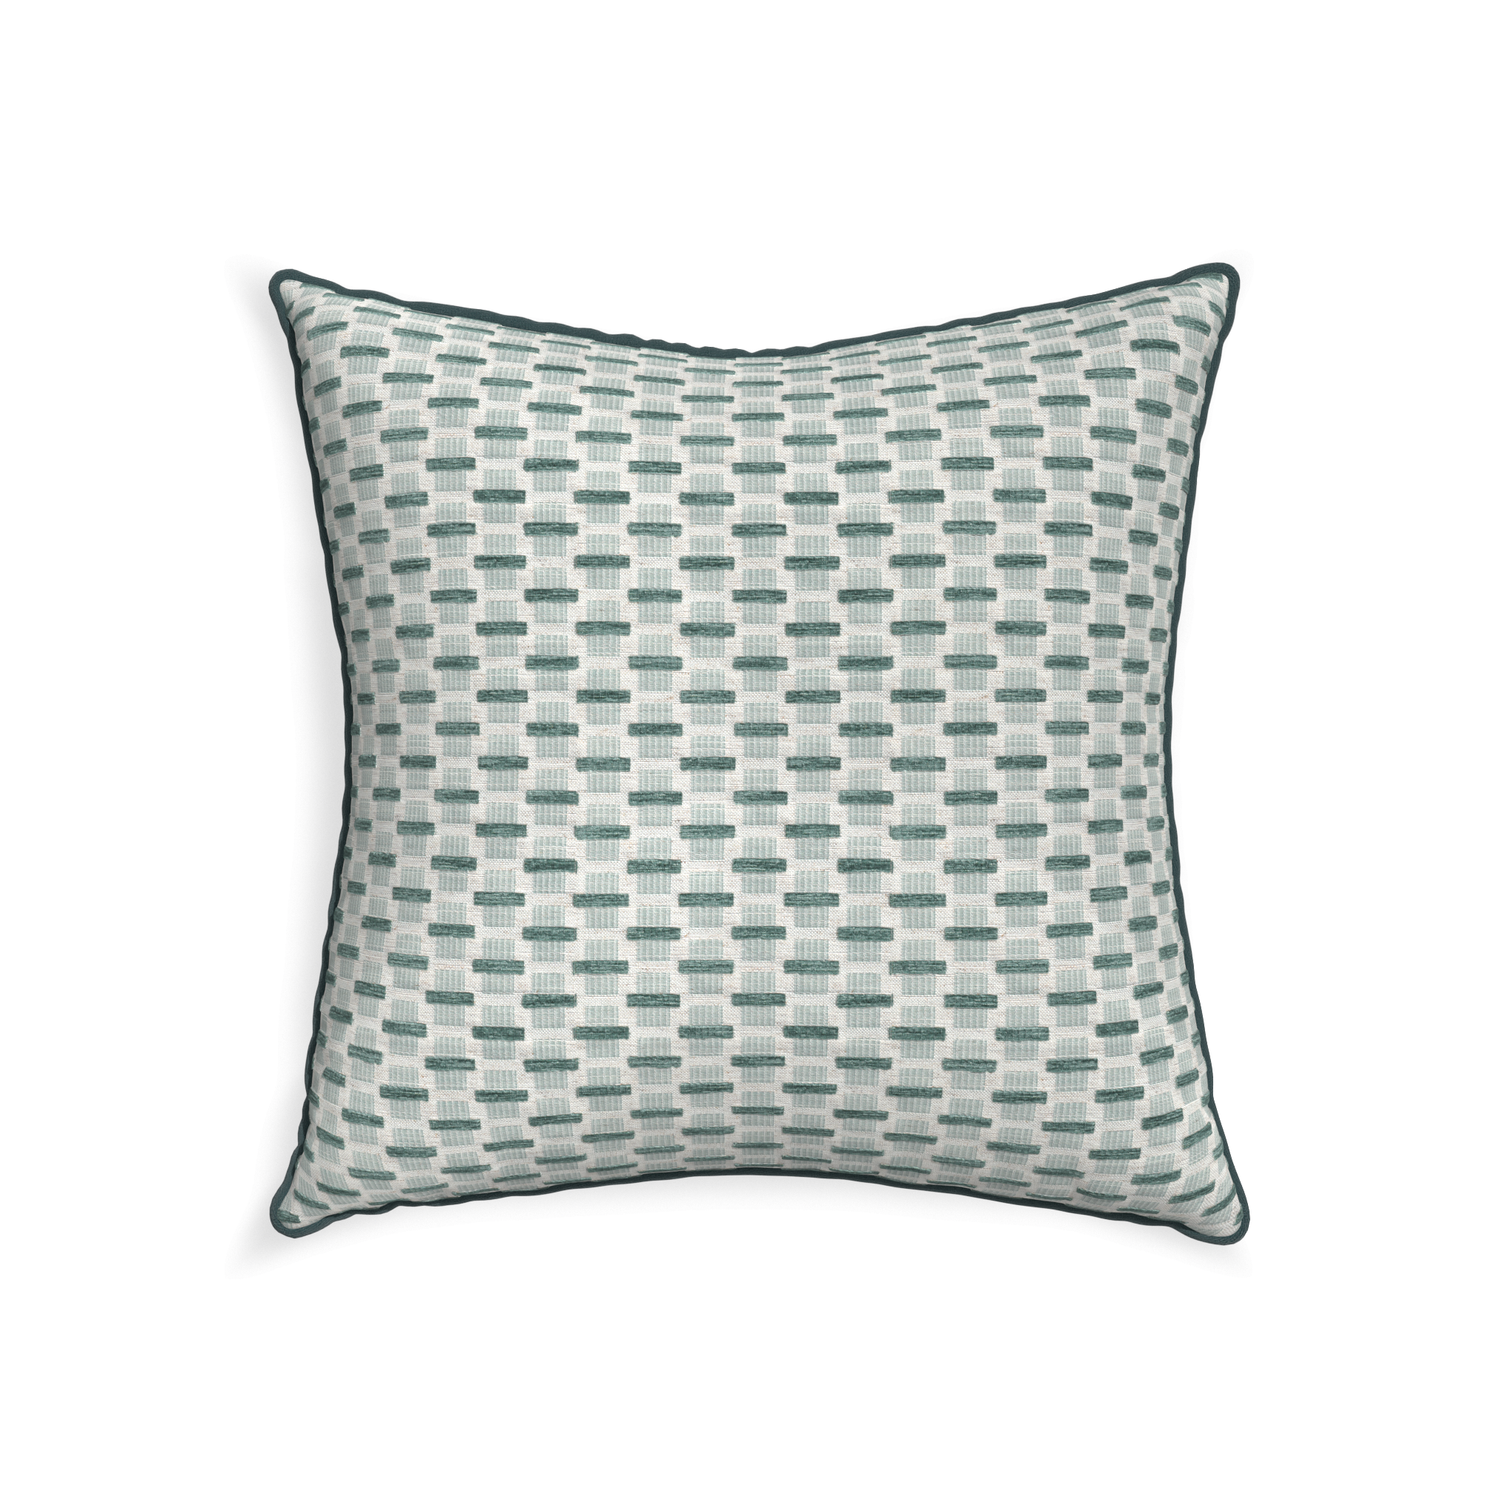 22-square willow mint custom green geometric chenillepillow with p piping on white background